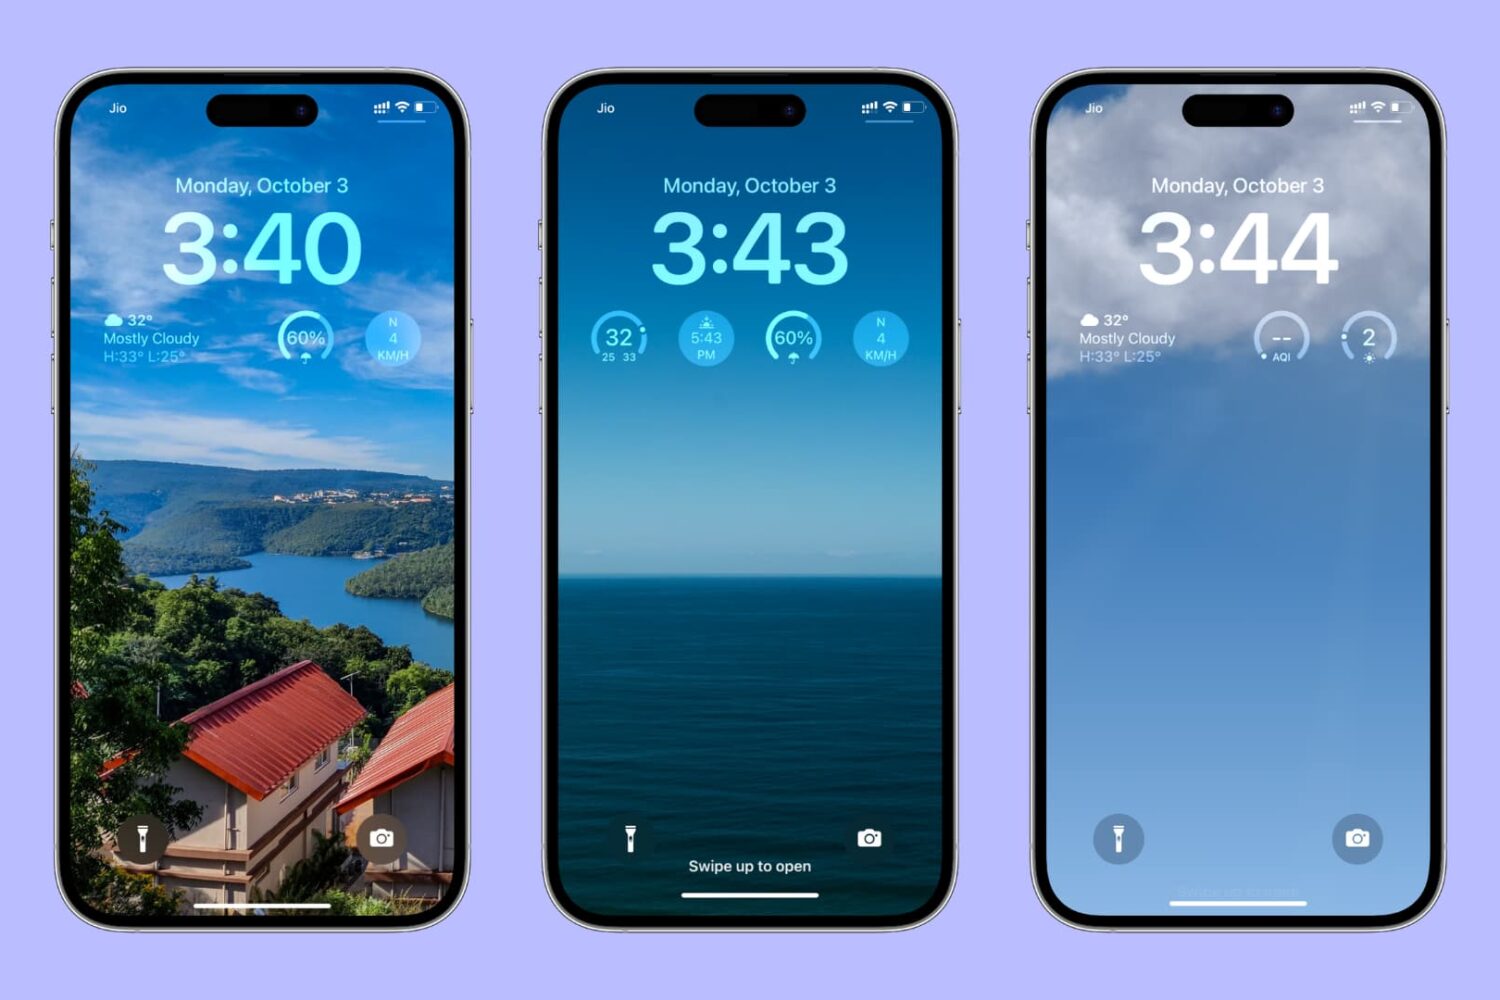 Three iPhone mockups showing weather conditions on the iPhone Lock Screen via weather widgets and smart weather wallpaper